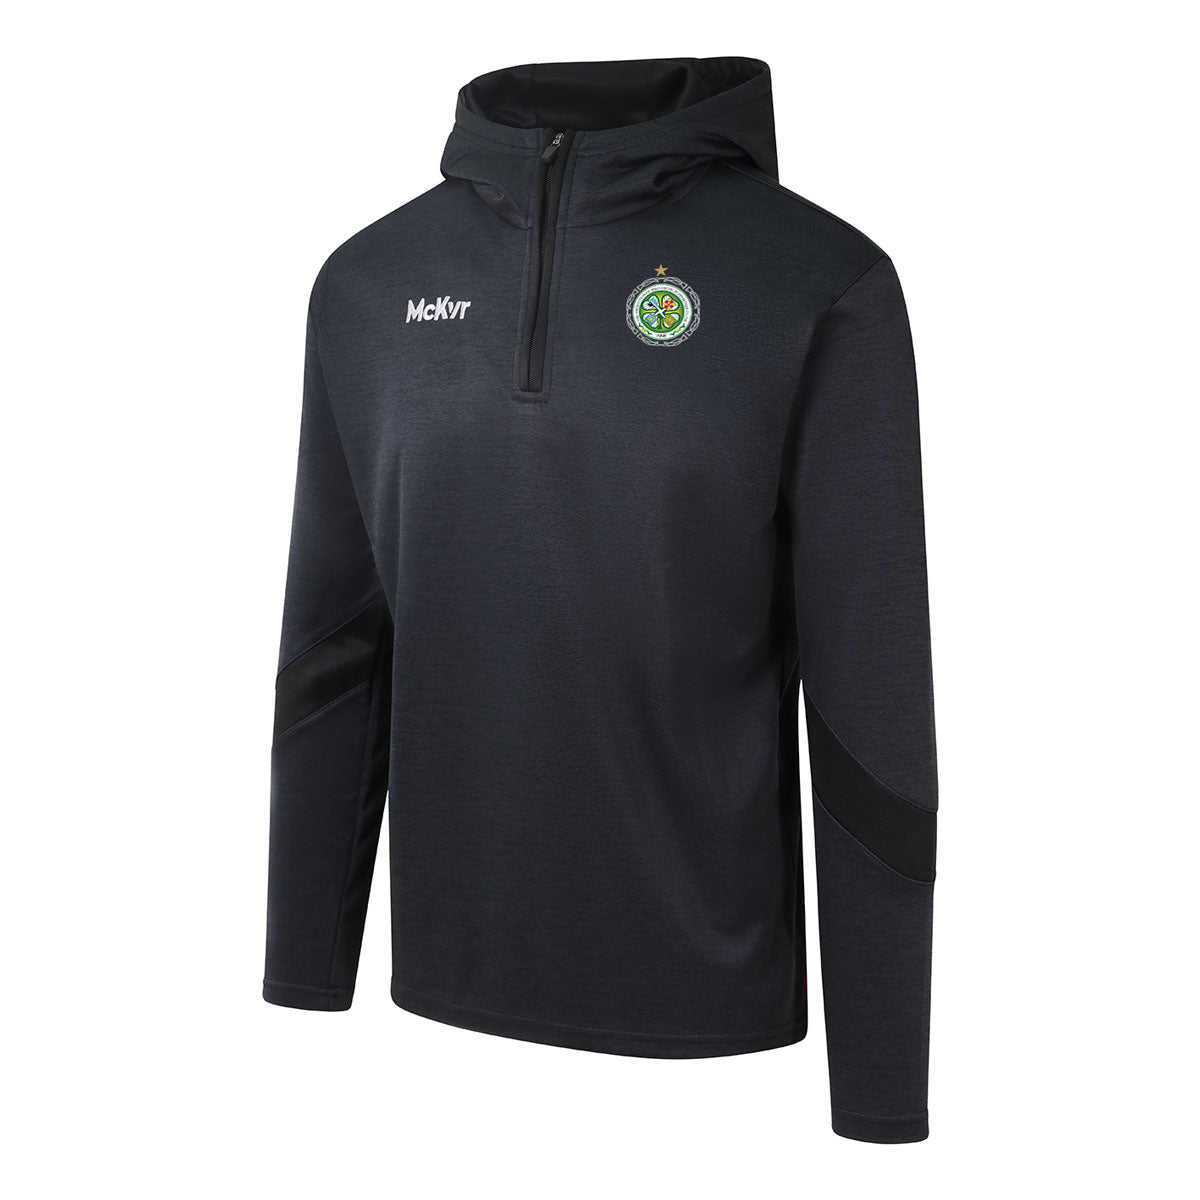 Mc Keever The Association of Irish Celtic Supporters Clubs Core 22 1/4 Zip Hoodie - Youth - Black